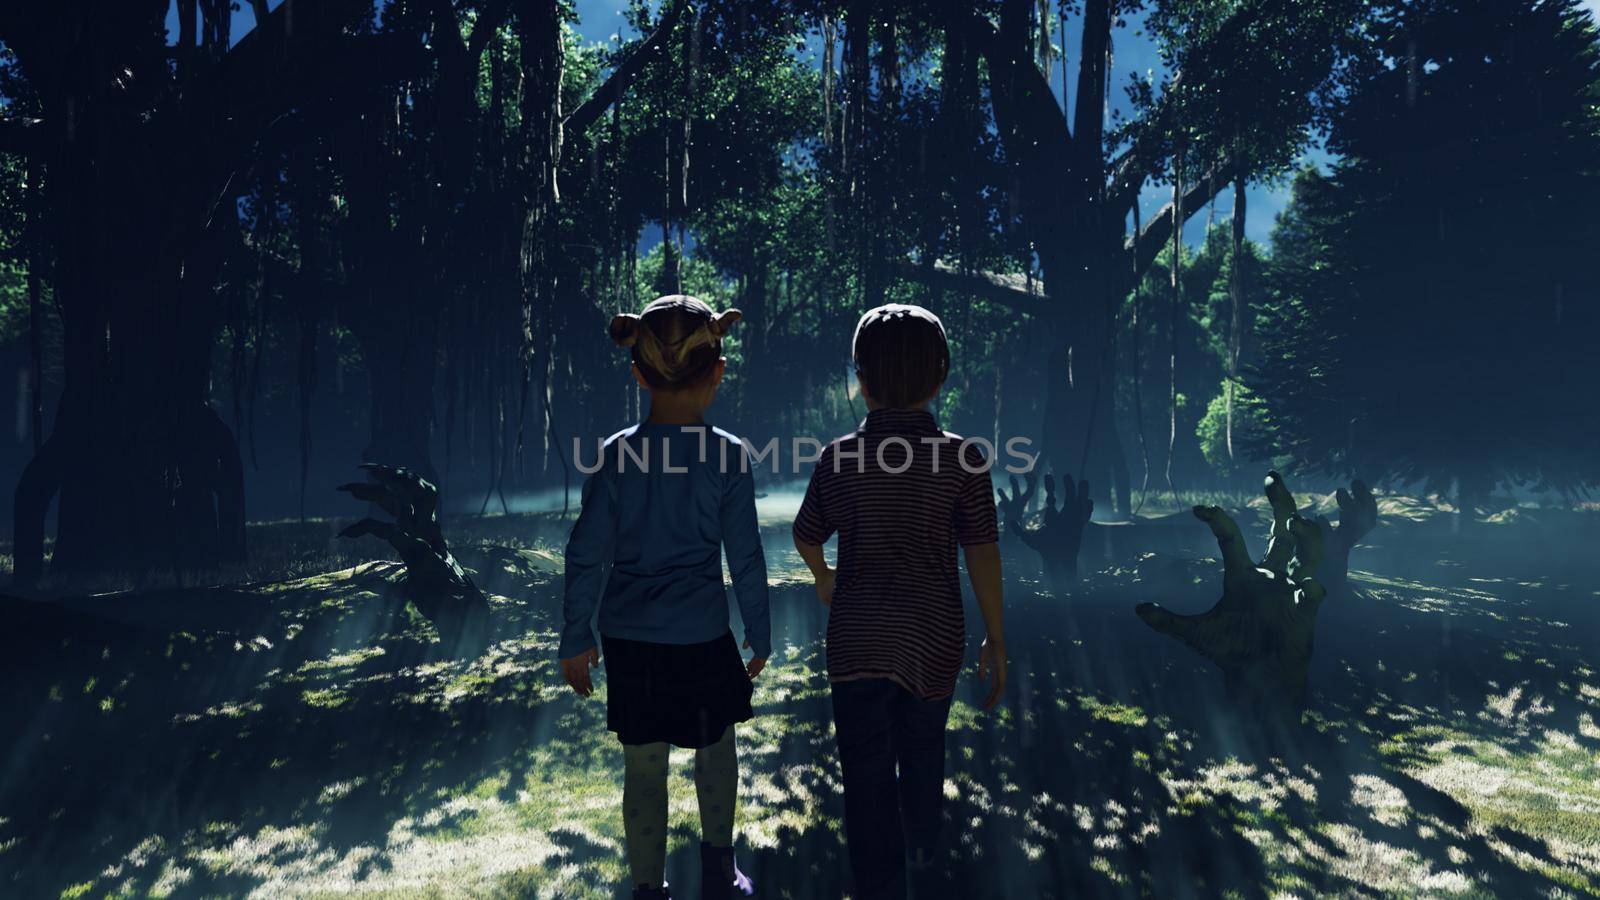 Little children walk through a dark mysterious misty swamp forest landscape. Dead hands reach for them from the ground, steam rises from the swamp, for a Halloween backdrop.